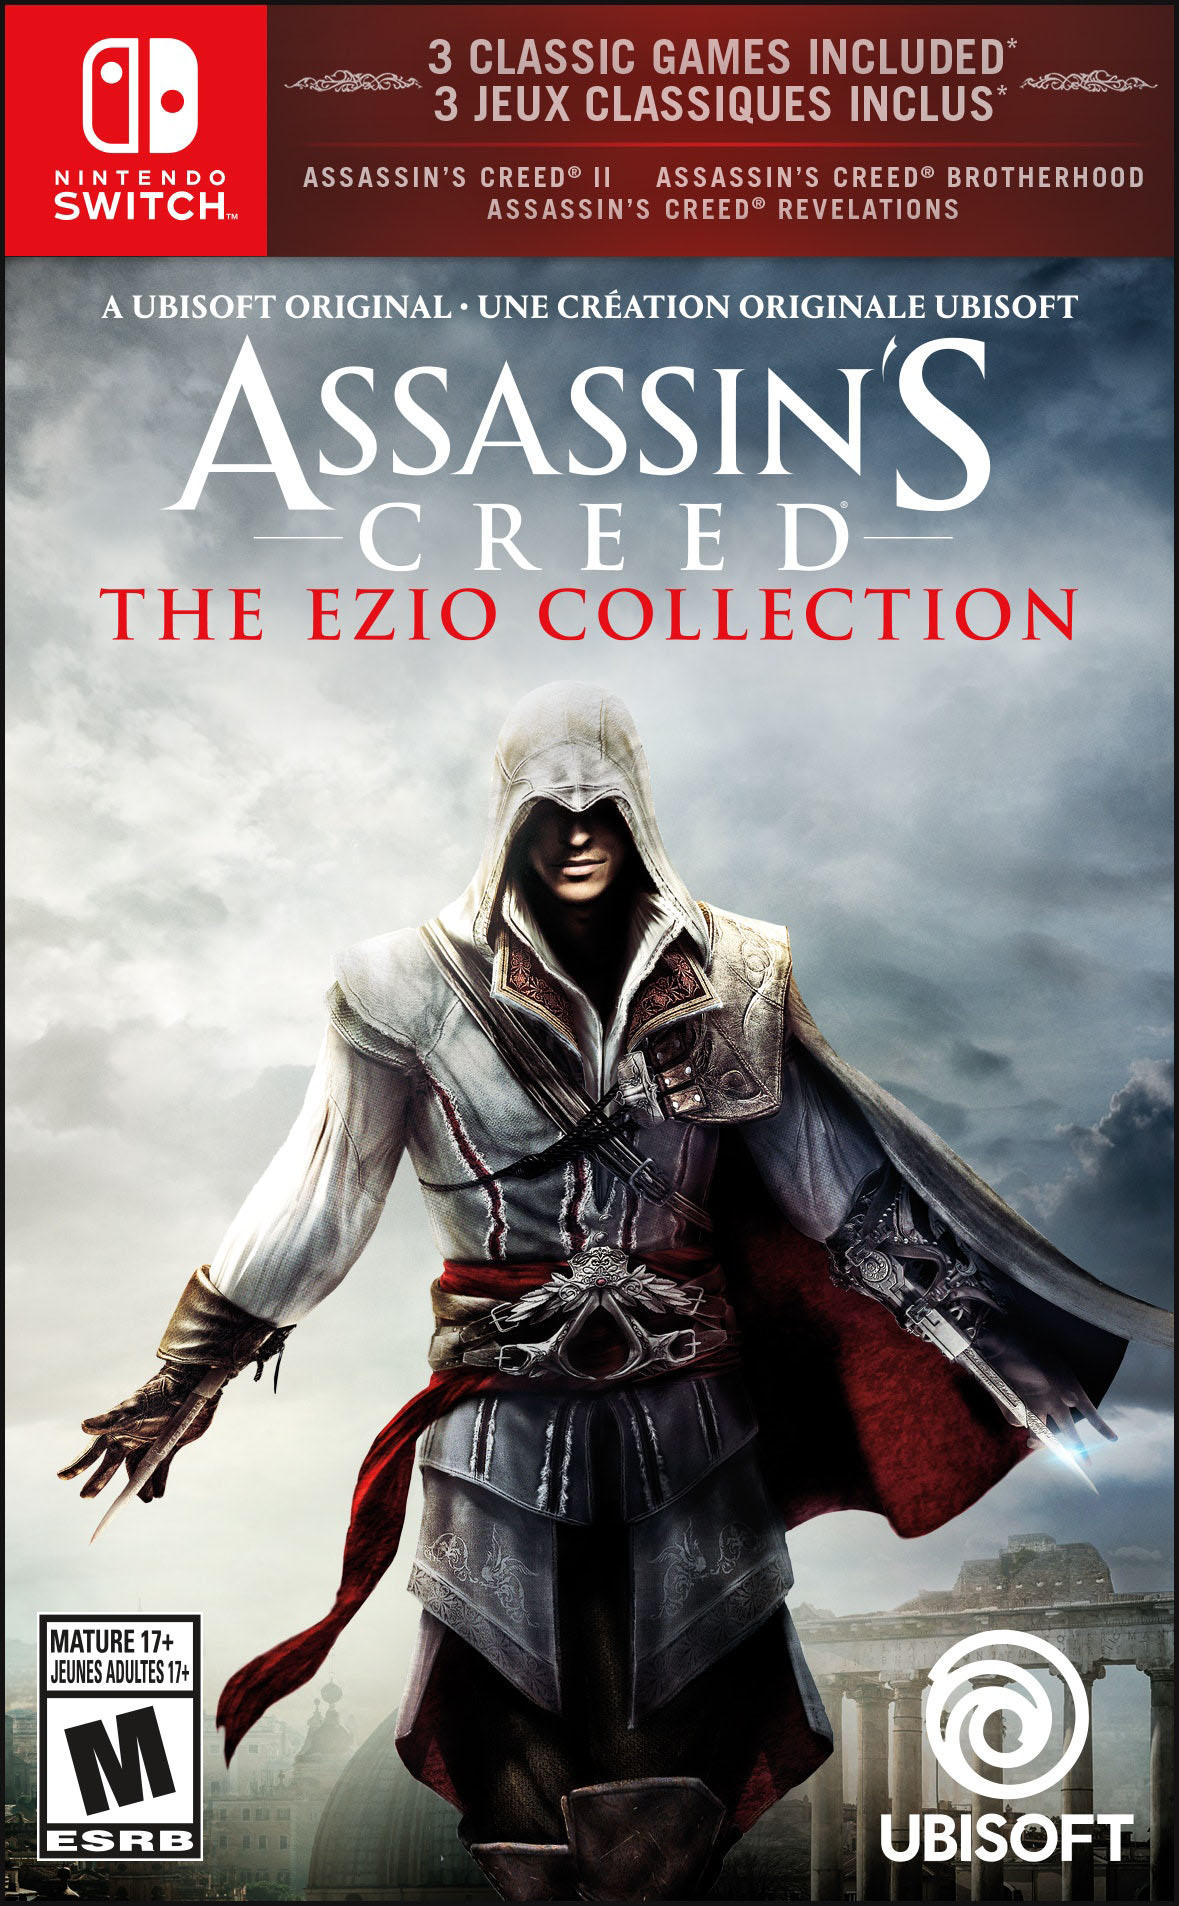 Anyone else hope the next remaster they announce will be assassin creed 3?  : r/assassinscreed